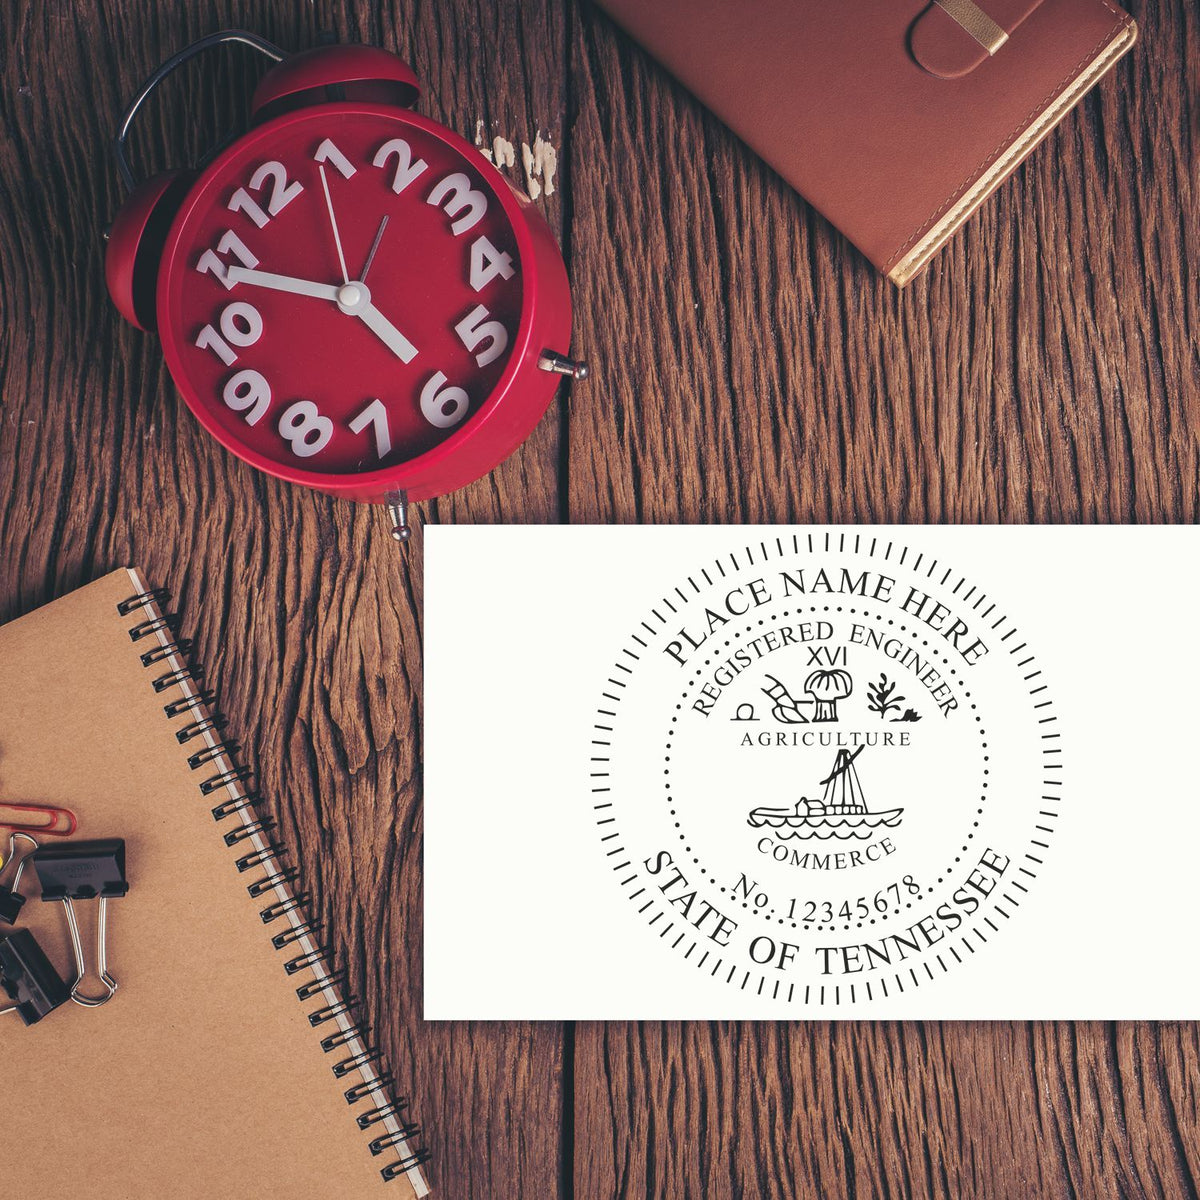 A stamped impression of the Slim Pre-Inked Tennessee Professional Engineer Seal Stamp in this stylish lifestyle photo, setting the tone for a unique and personalized product.